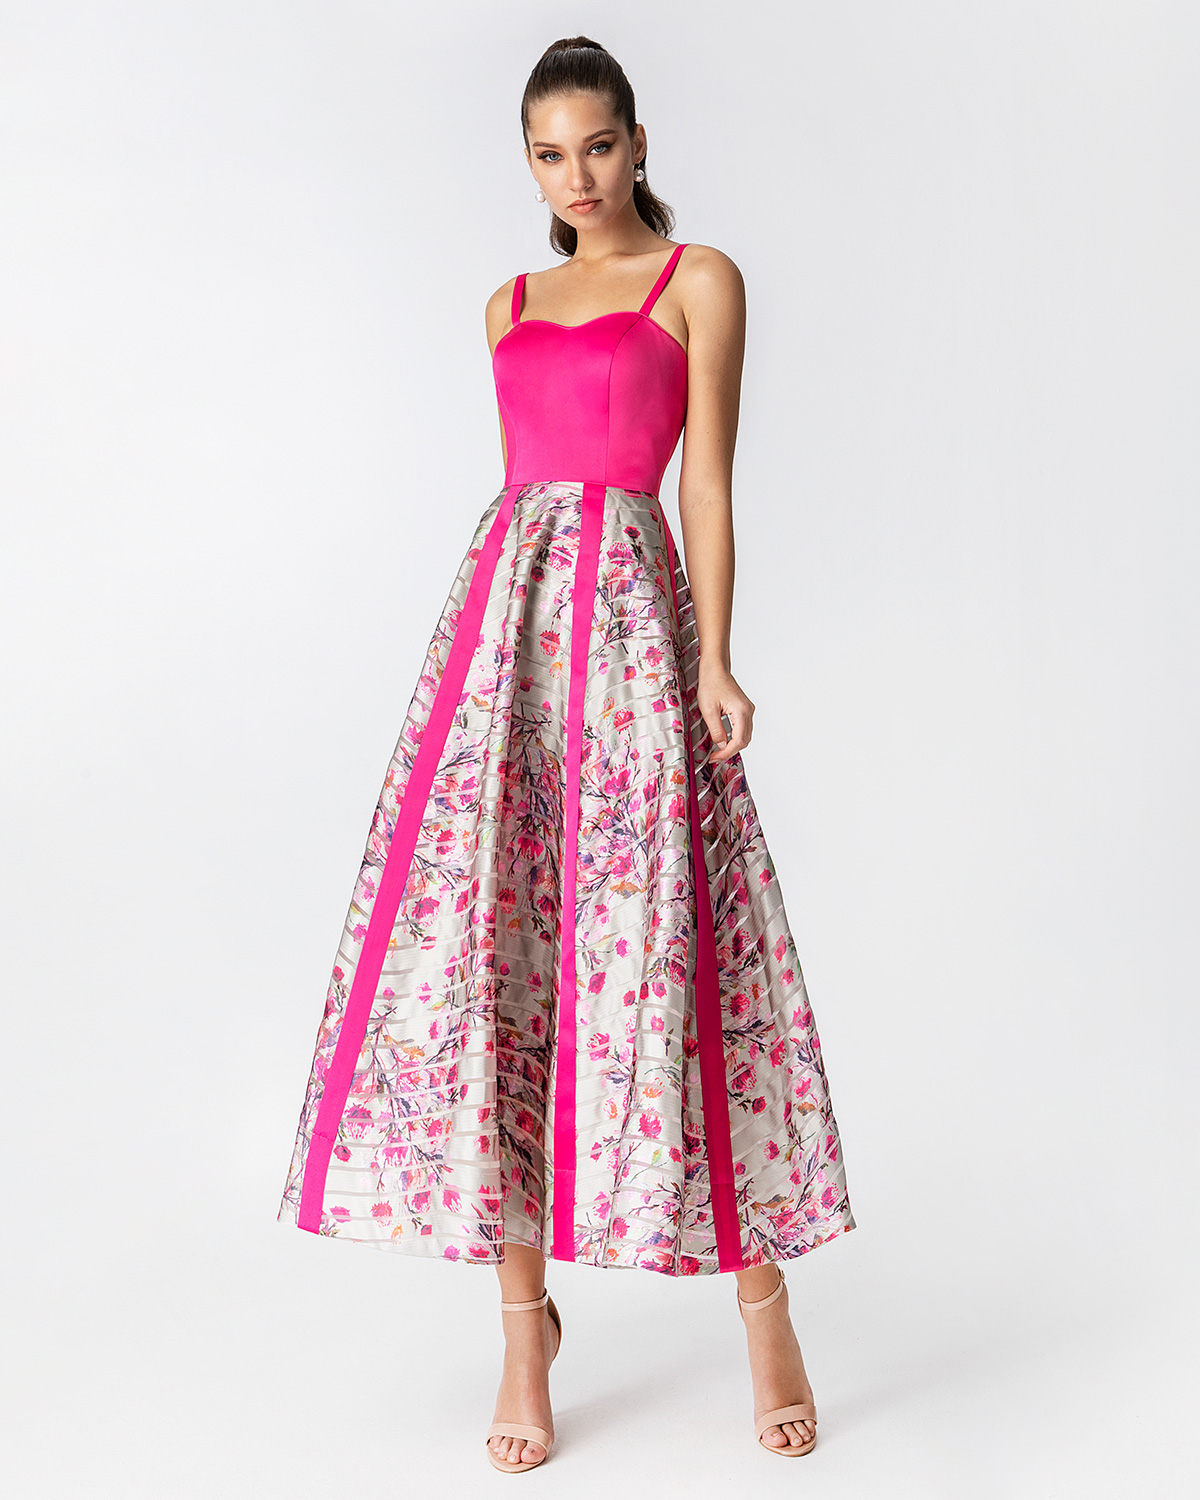 Cocktail Dresses / Cocktail midi dress with printed skirt and solid color top